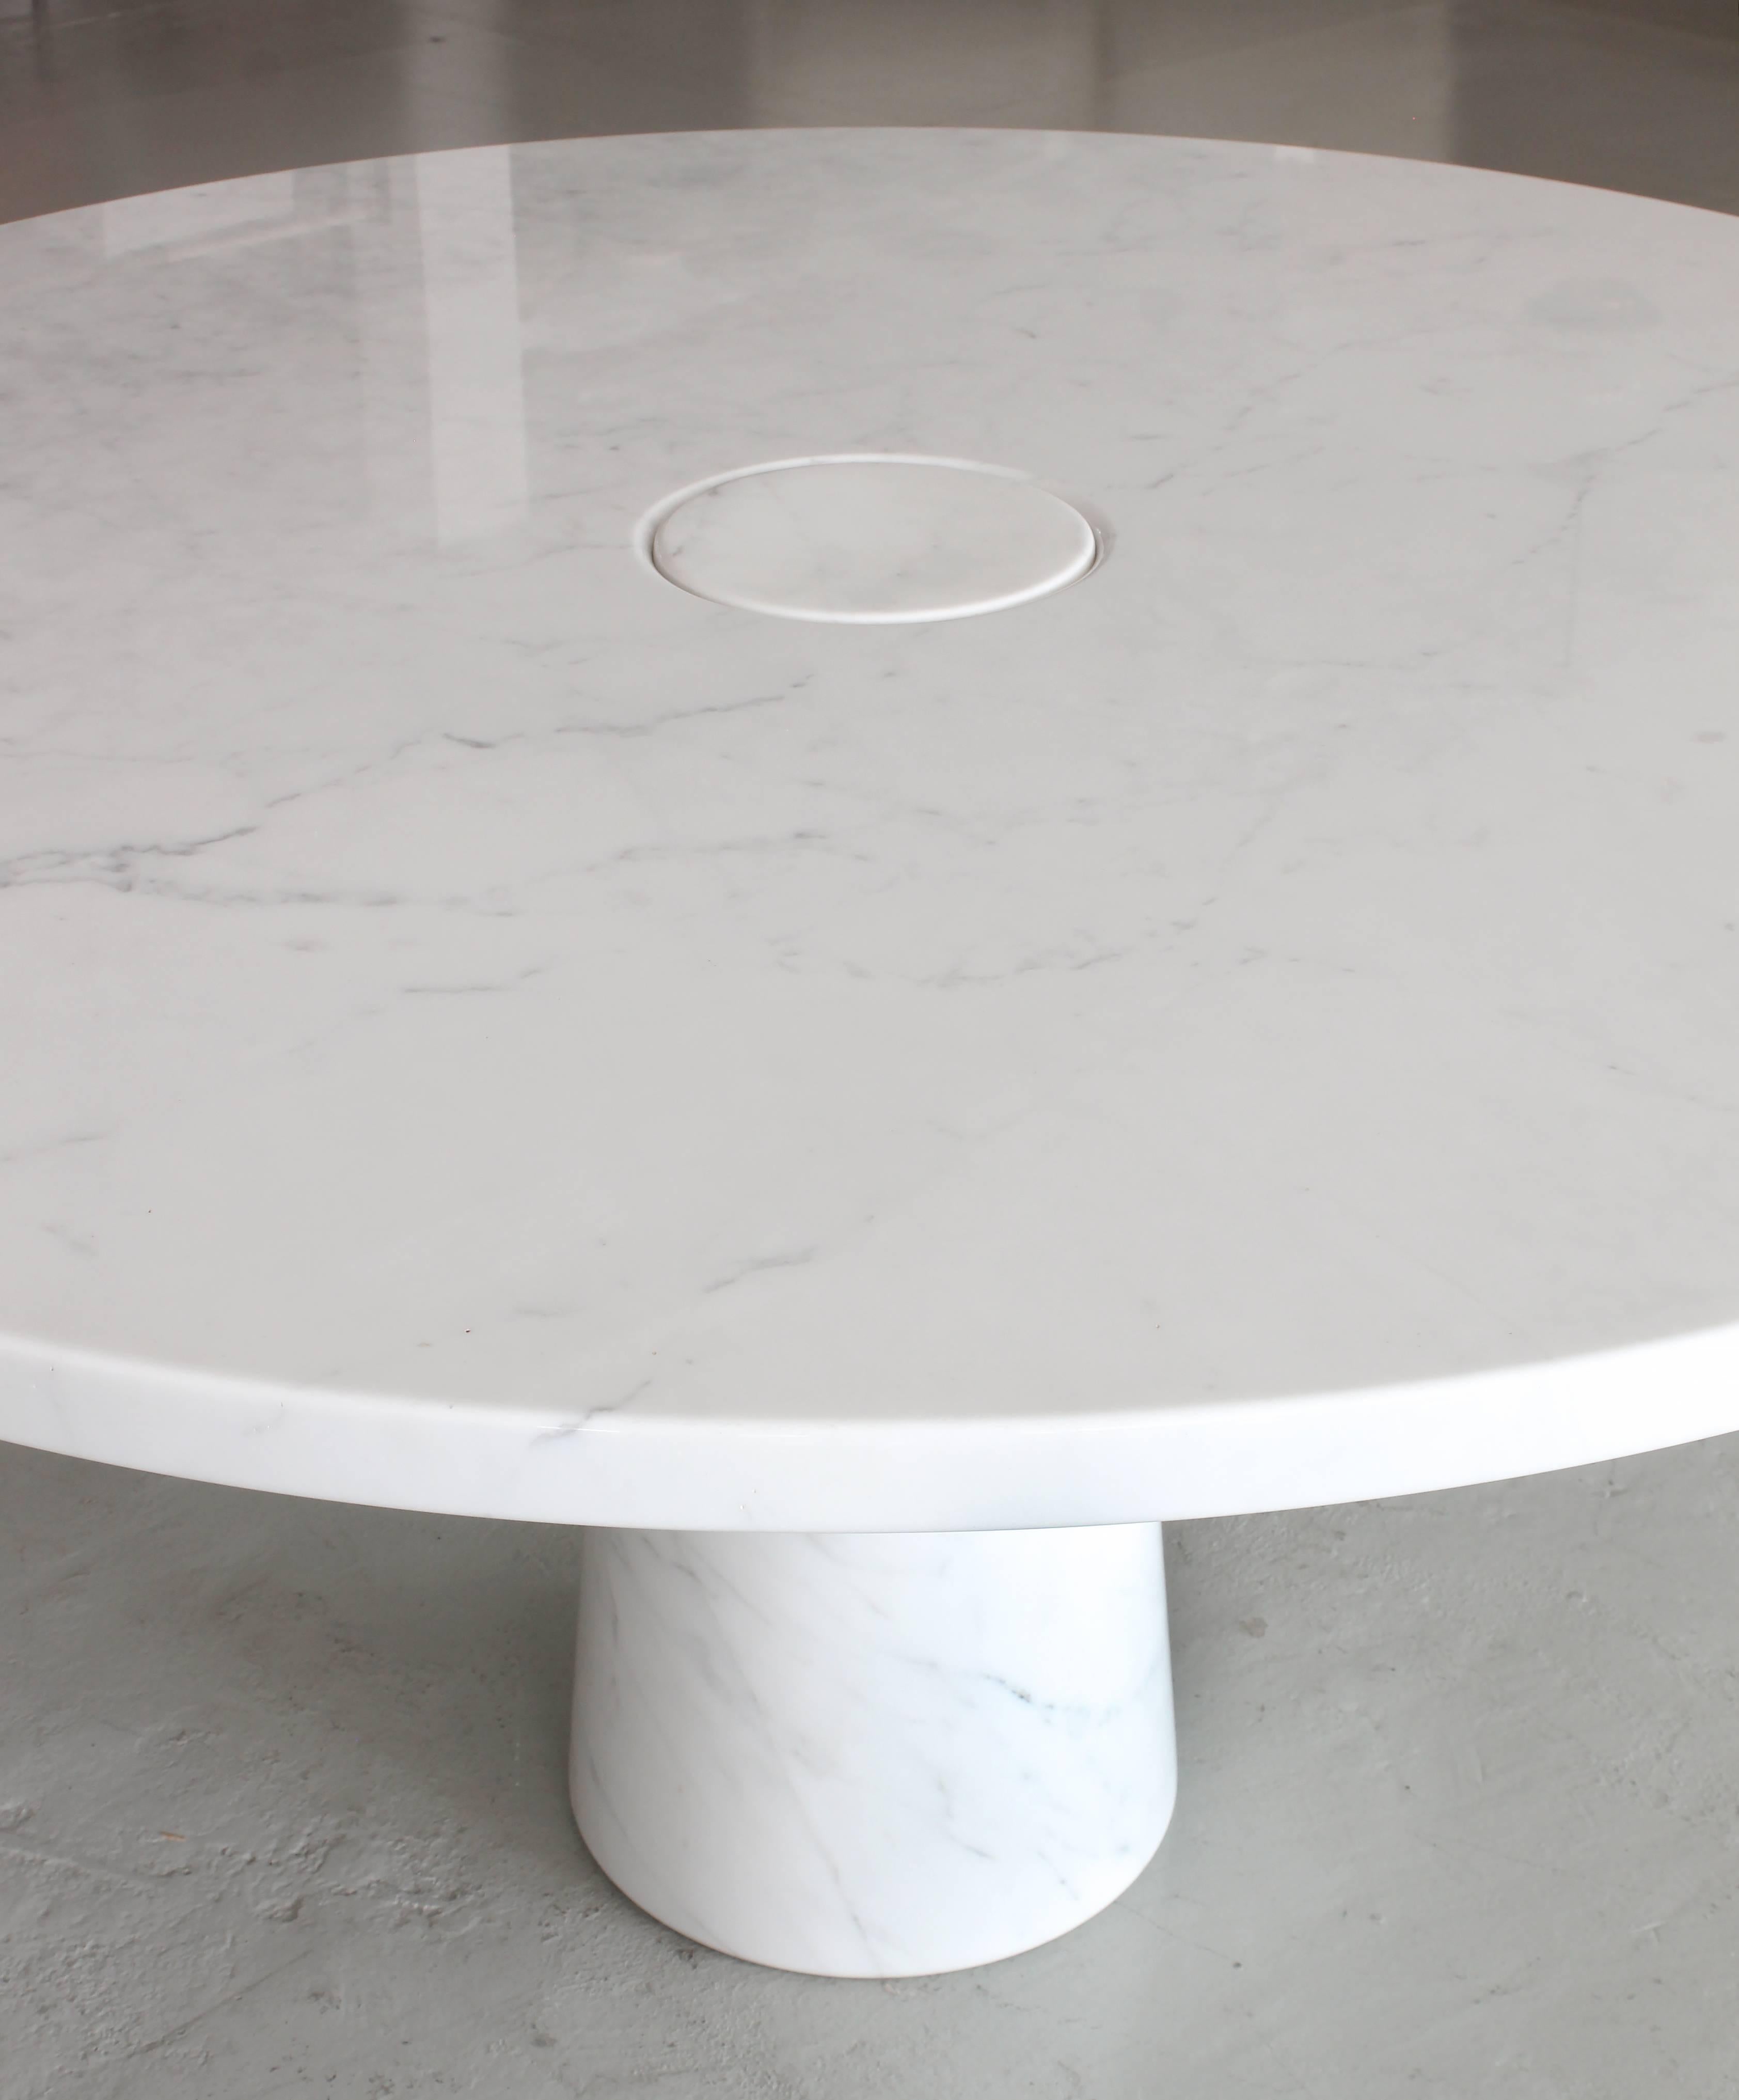 Absolutely magnificent large round marble dining table from Mangiarotti’s Eros series. Beautiful Carrara marble top floating over marble conic pedestal with light white veining throughout. Could also work as an entry table in a grand foyer.